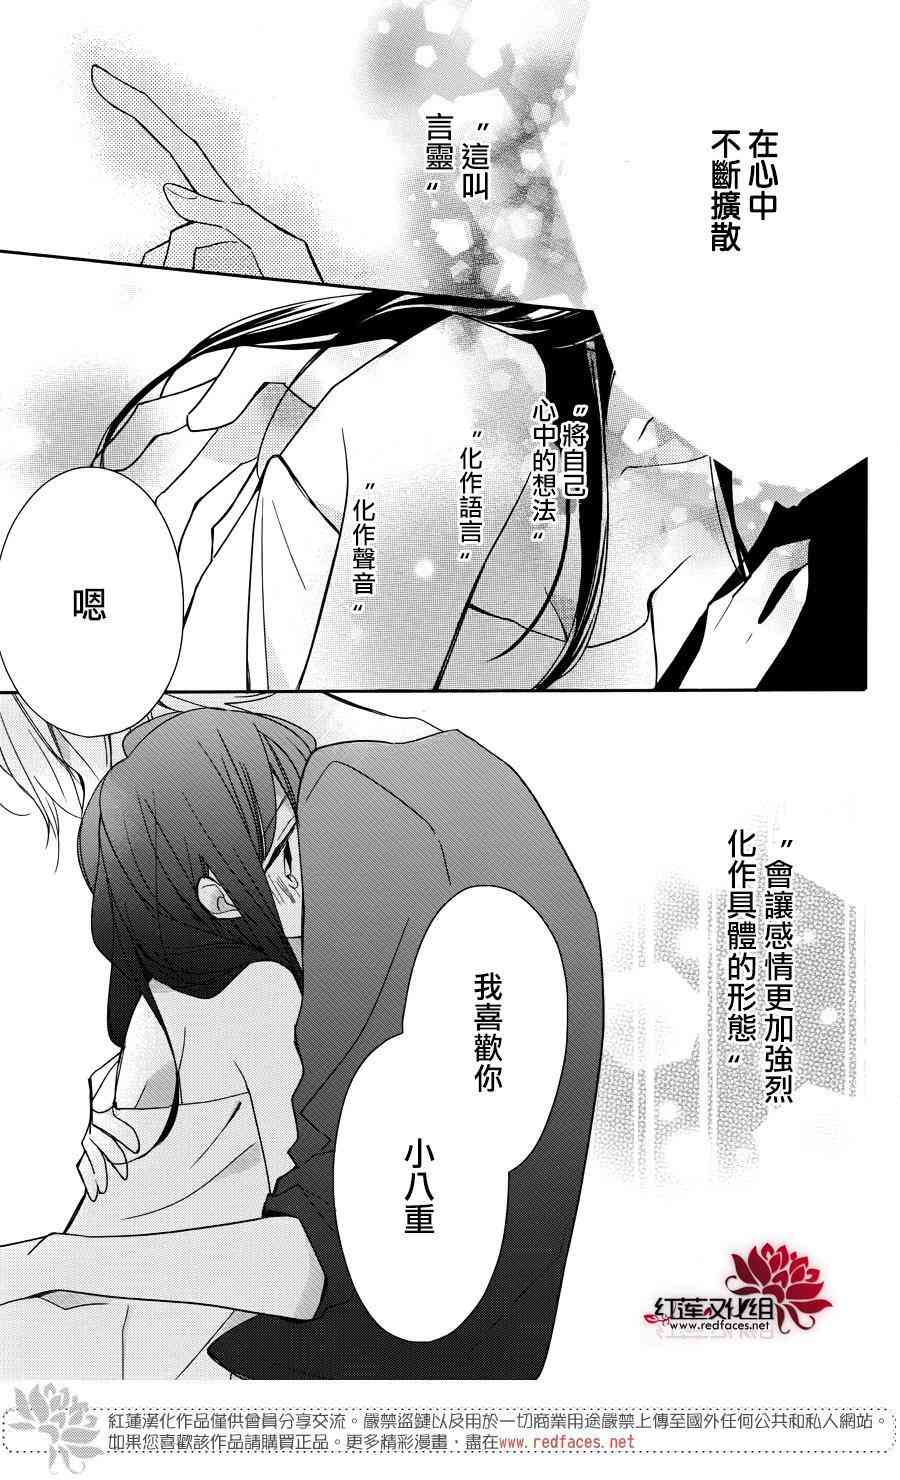 If given a second chance - 4話 - 6